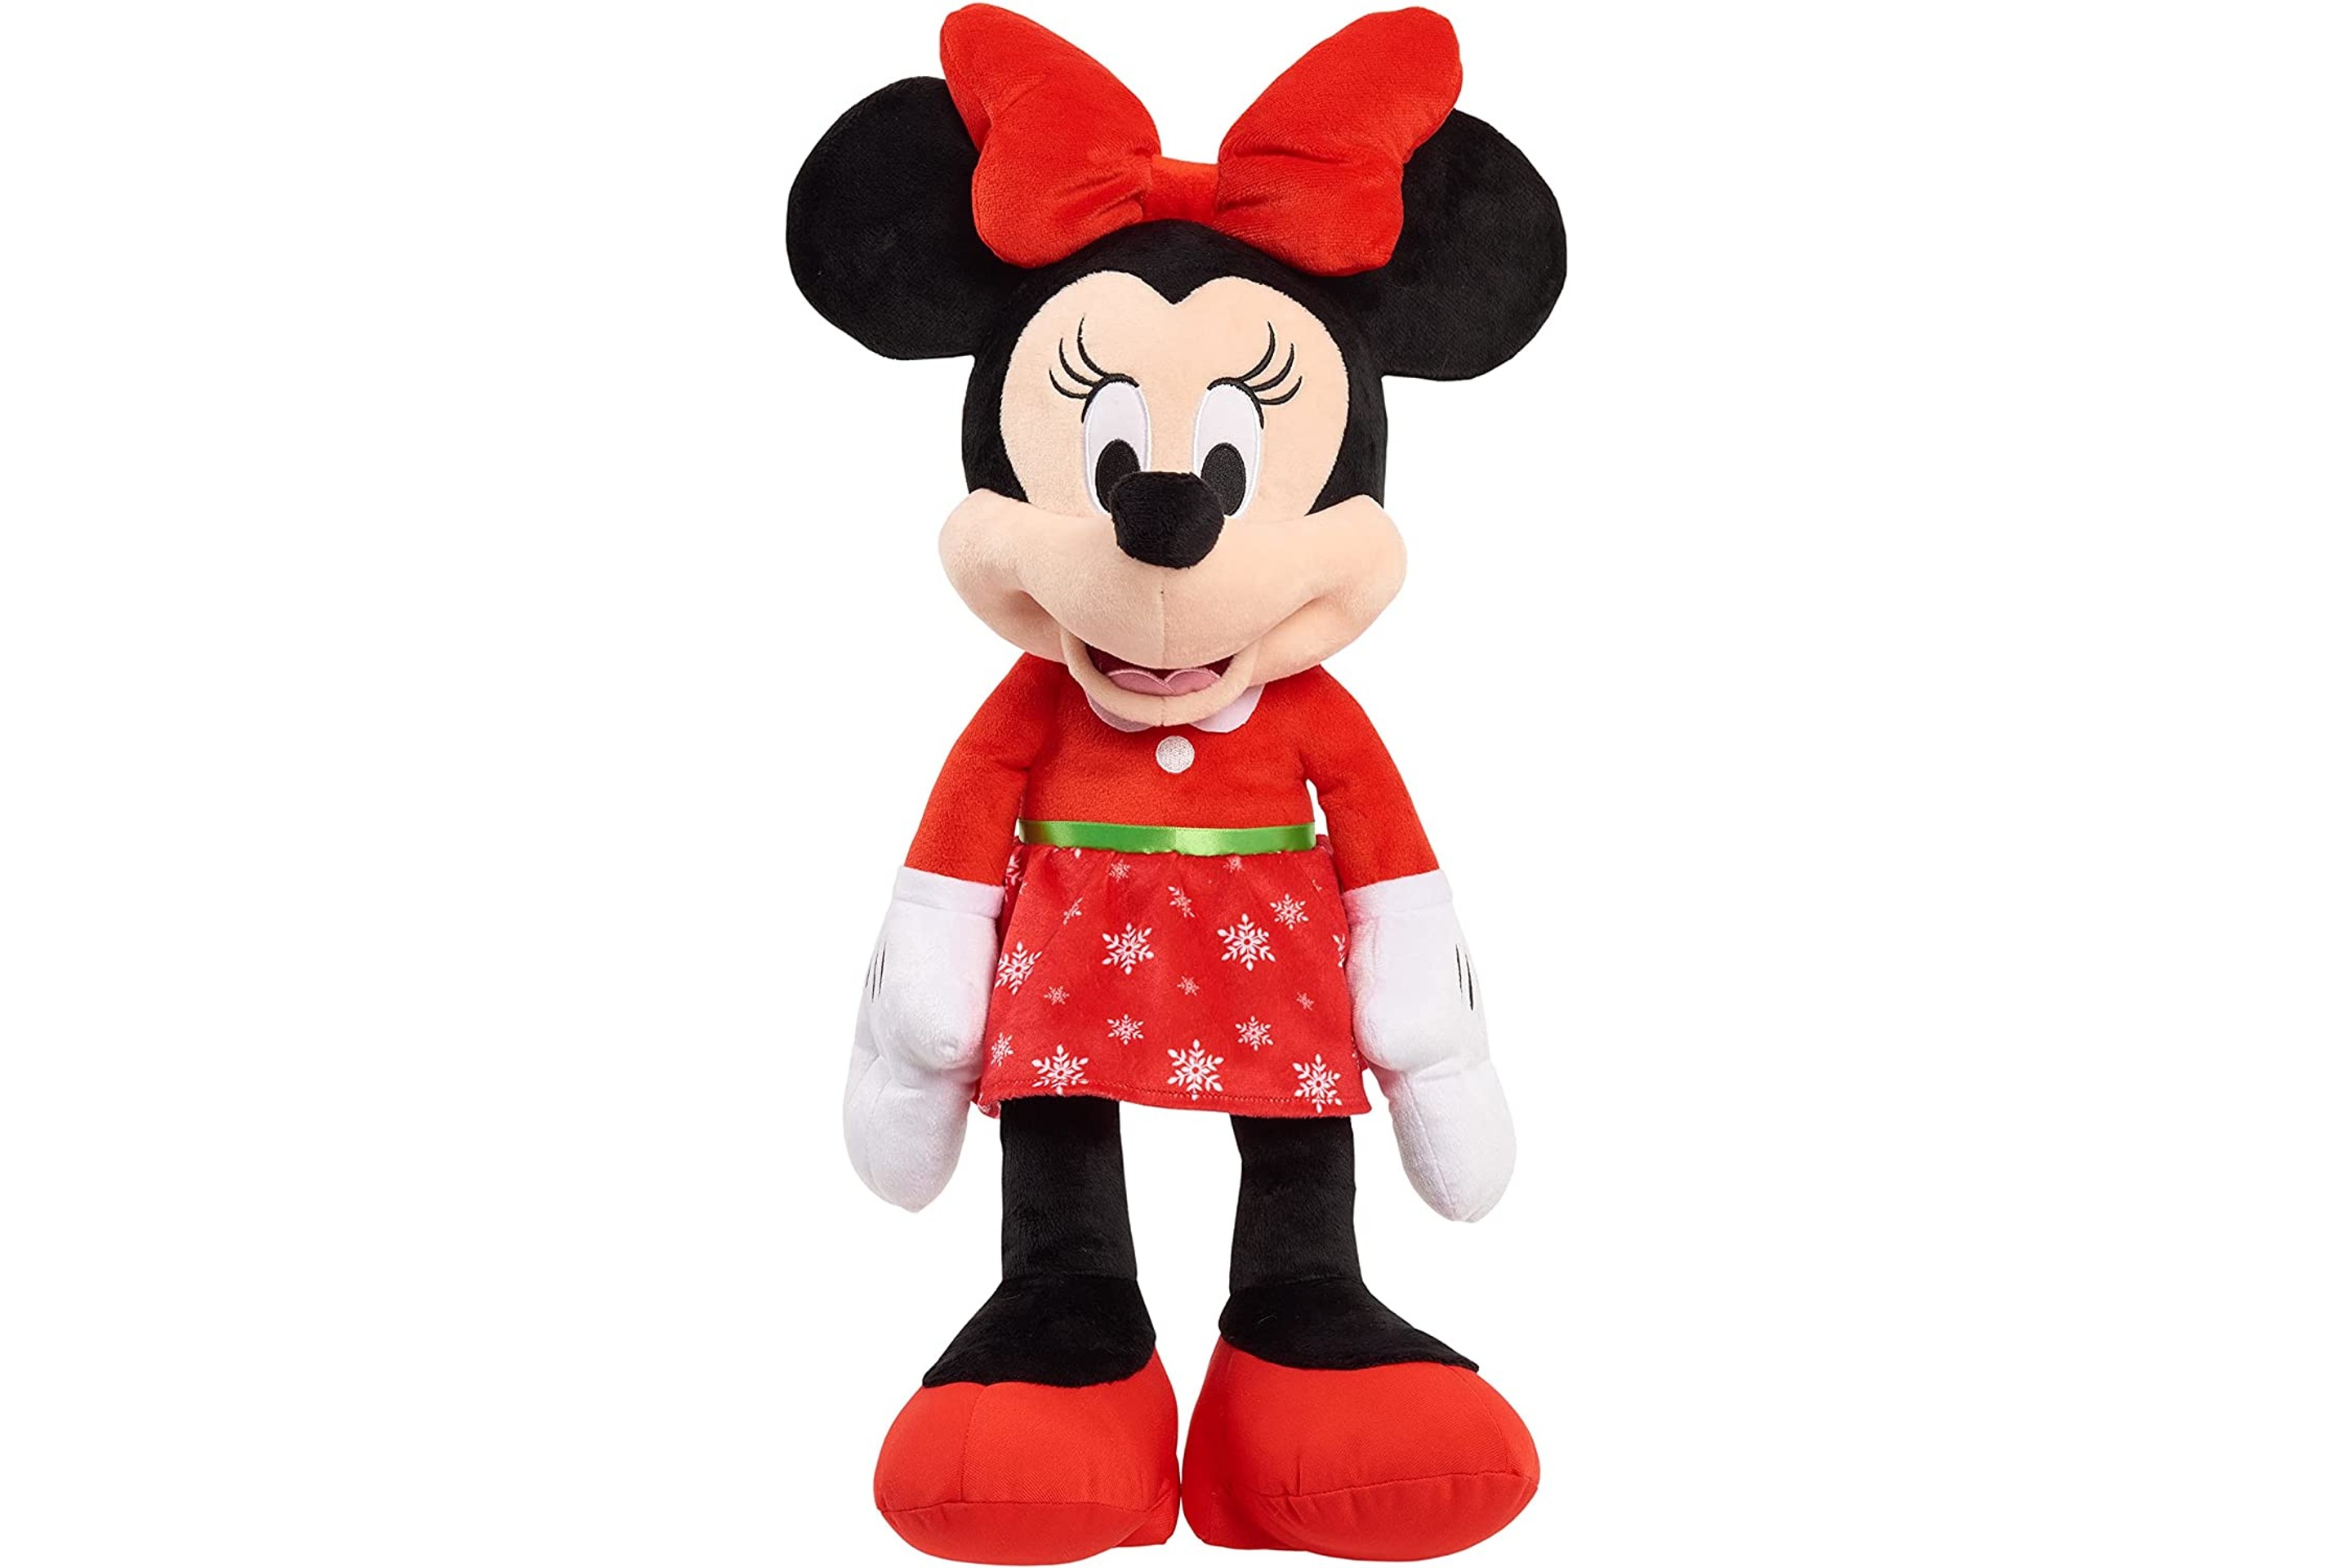 Disney Holiday Minnie Mouse Large 22-Inch Plush